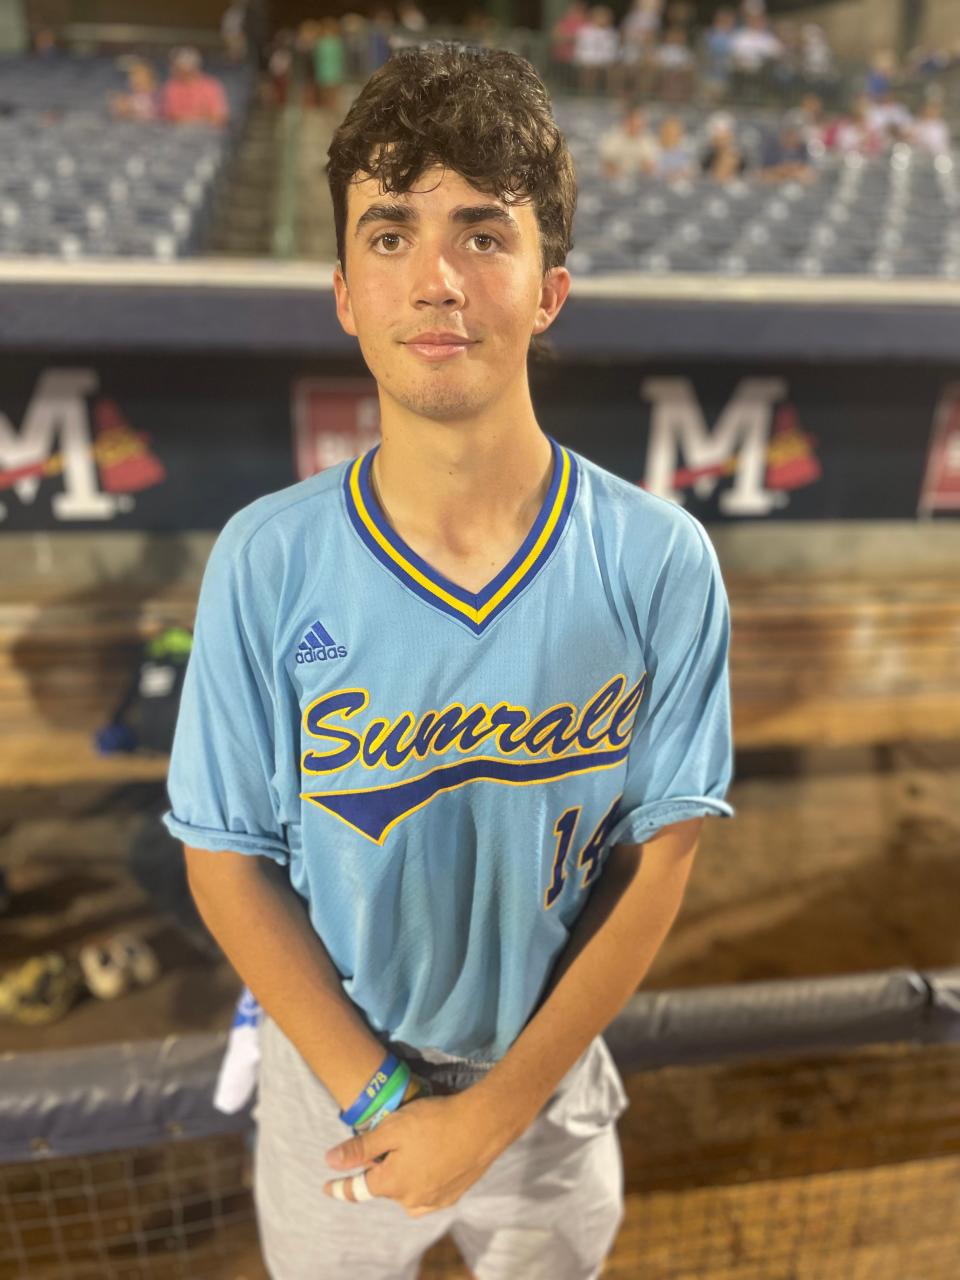 Ethan Aultman hit a walk-off RBI double to secure a 6-5 win for Sumrall in Game 1 of the Class 4A state championship series